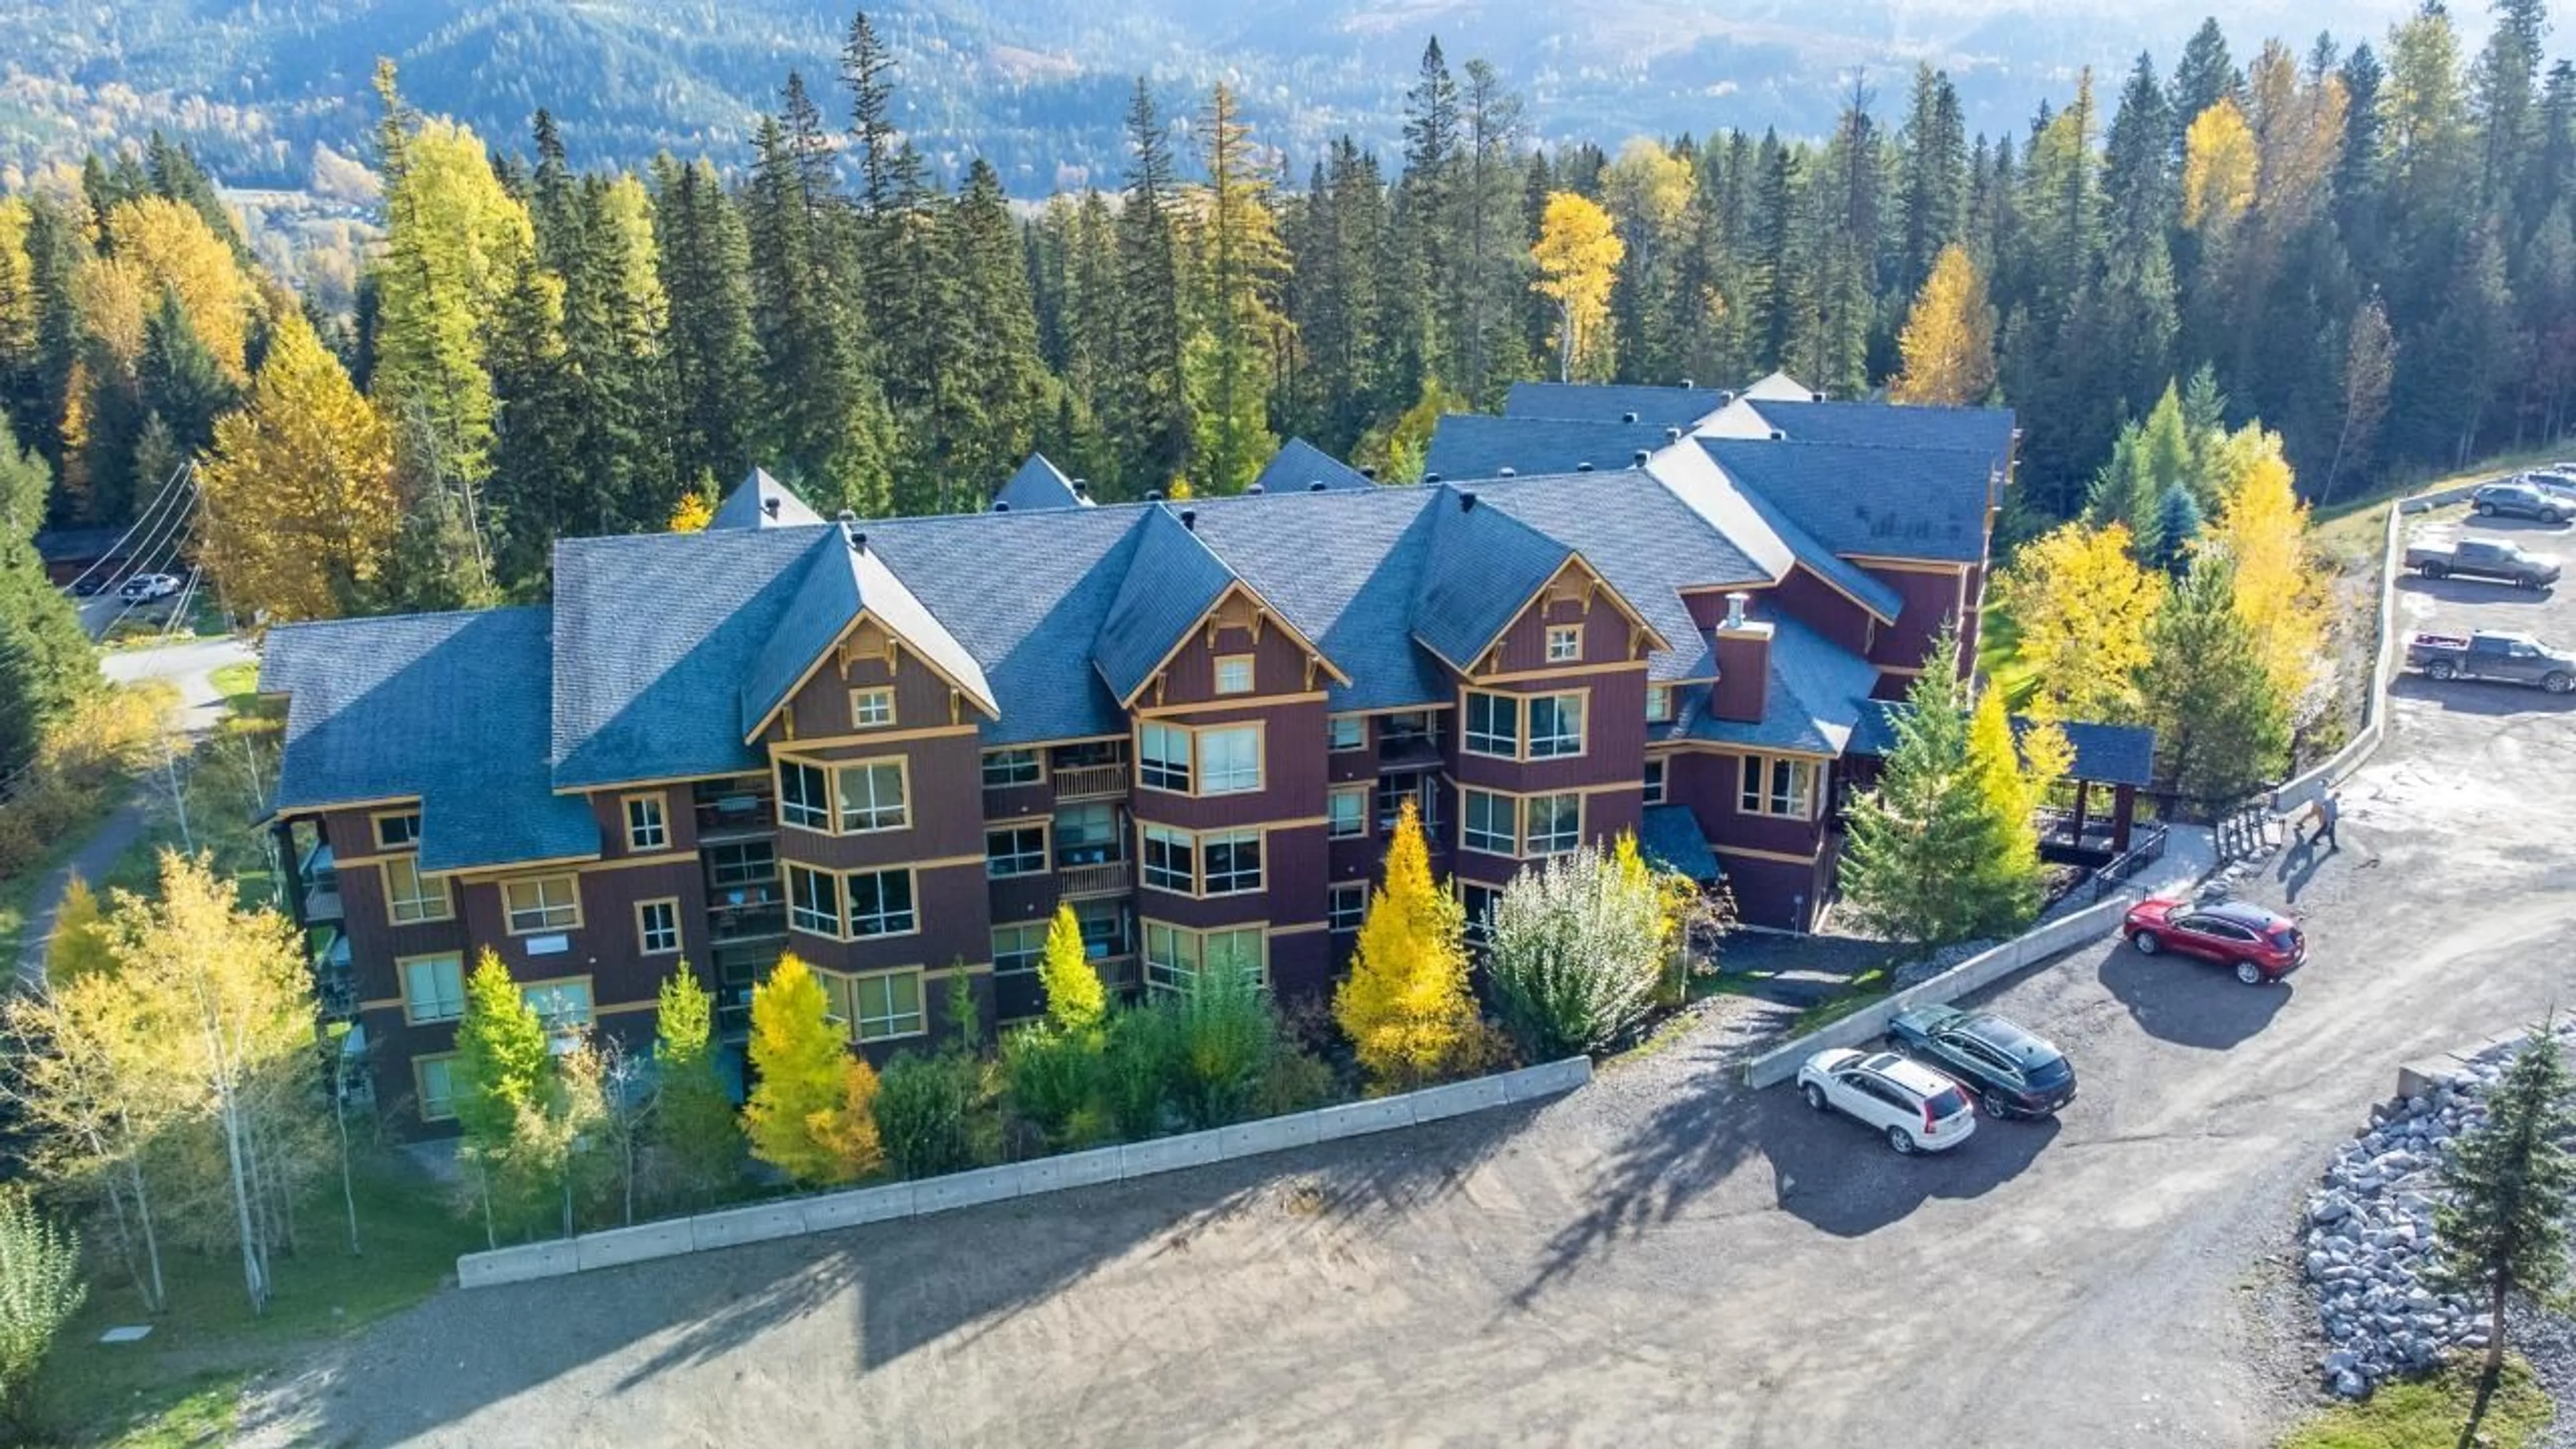 A pic from exterior of the house or condo for 637 - 4559 TIMBERLINE CRESCENT, Fernie British Columbia V0B1M6